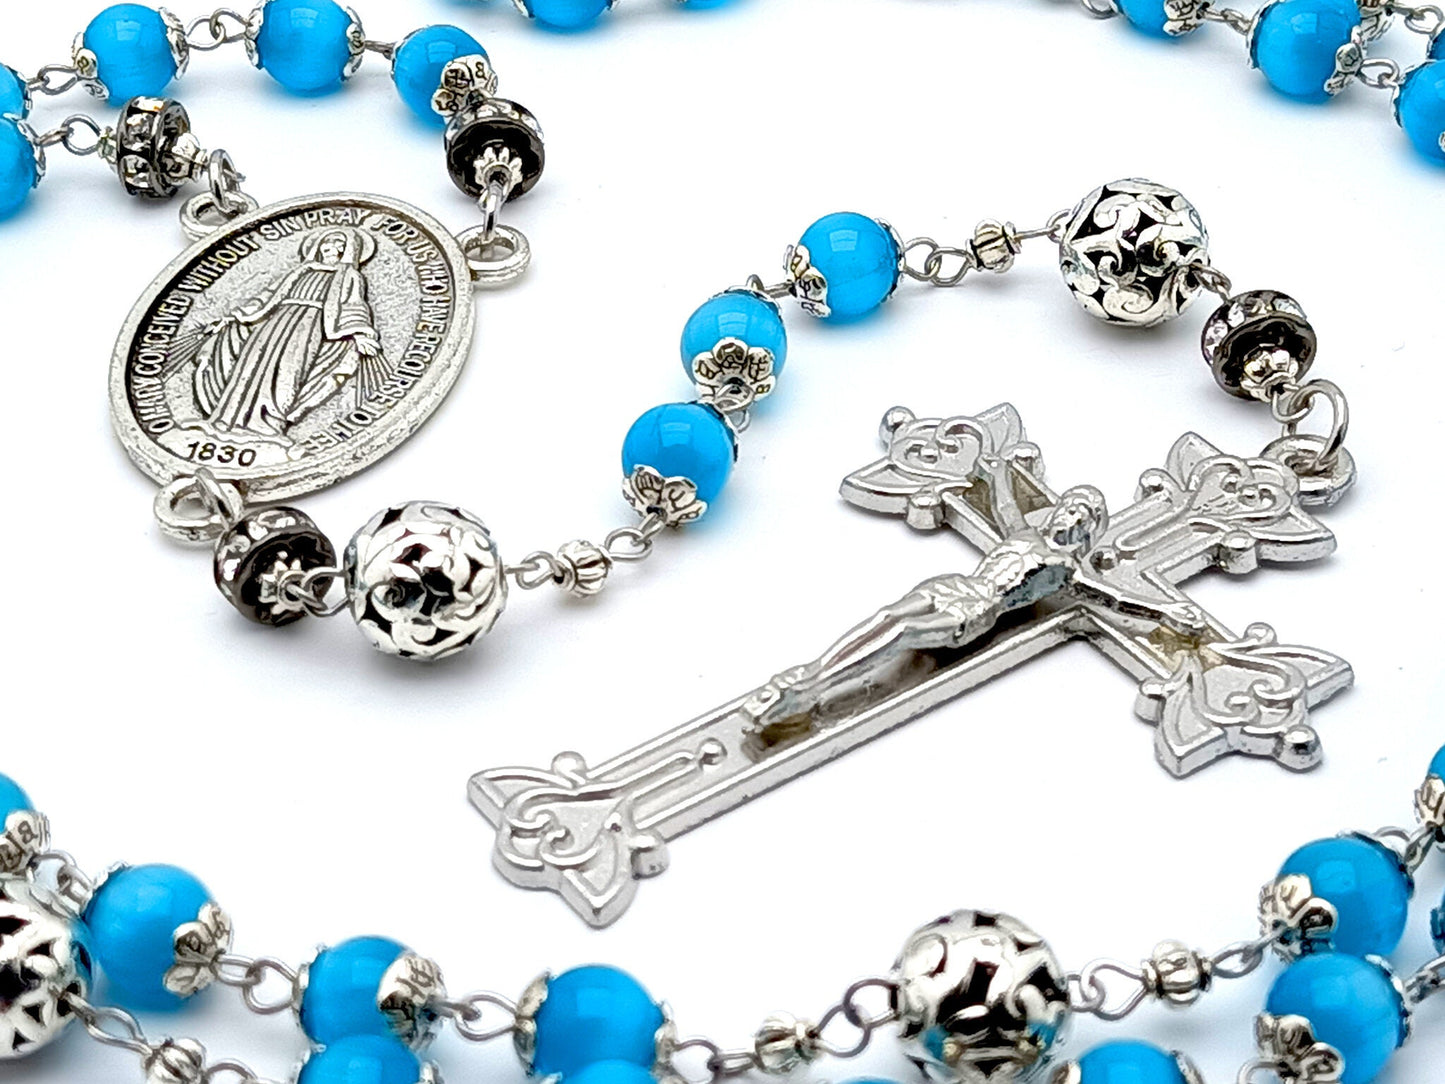 Miraculous Medal unique rosary beads with blue glass and silver beads, large silver plated crucifix, centre medal and silver diamonte accessories.